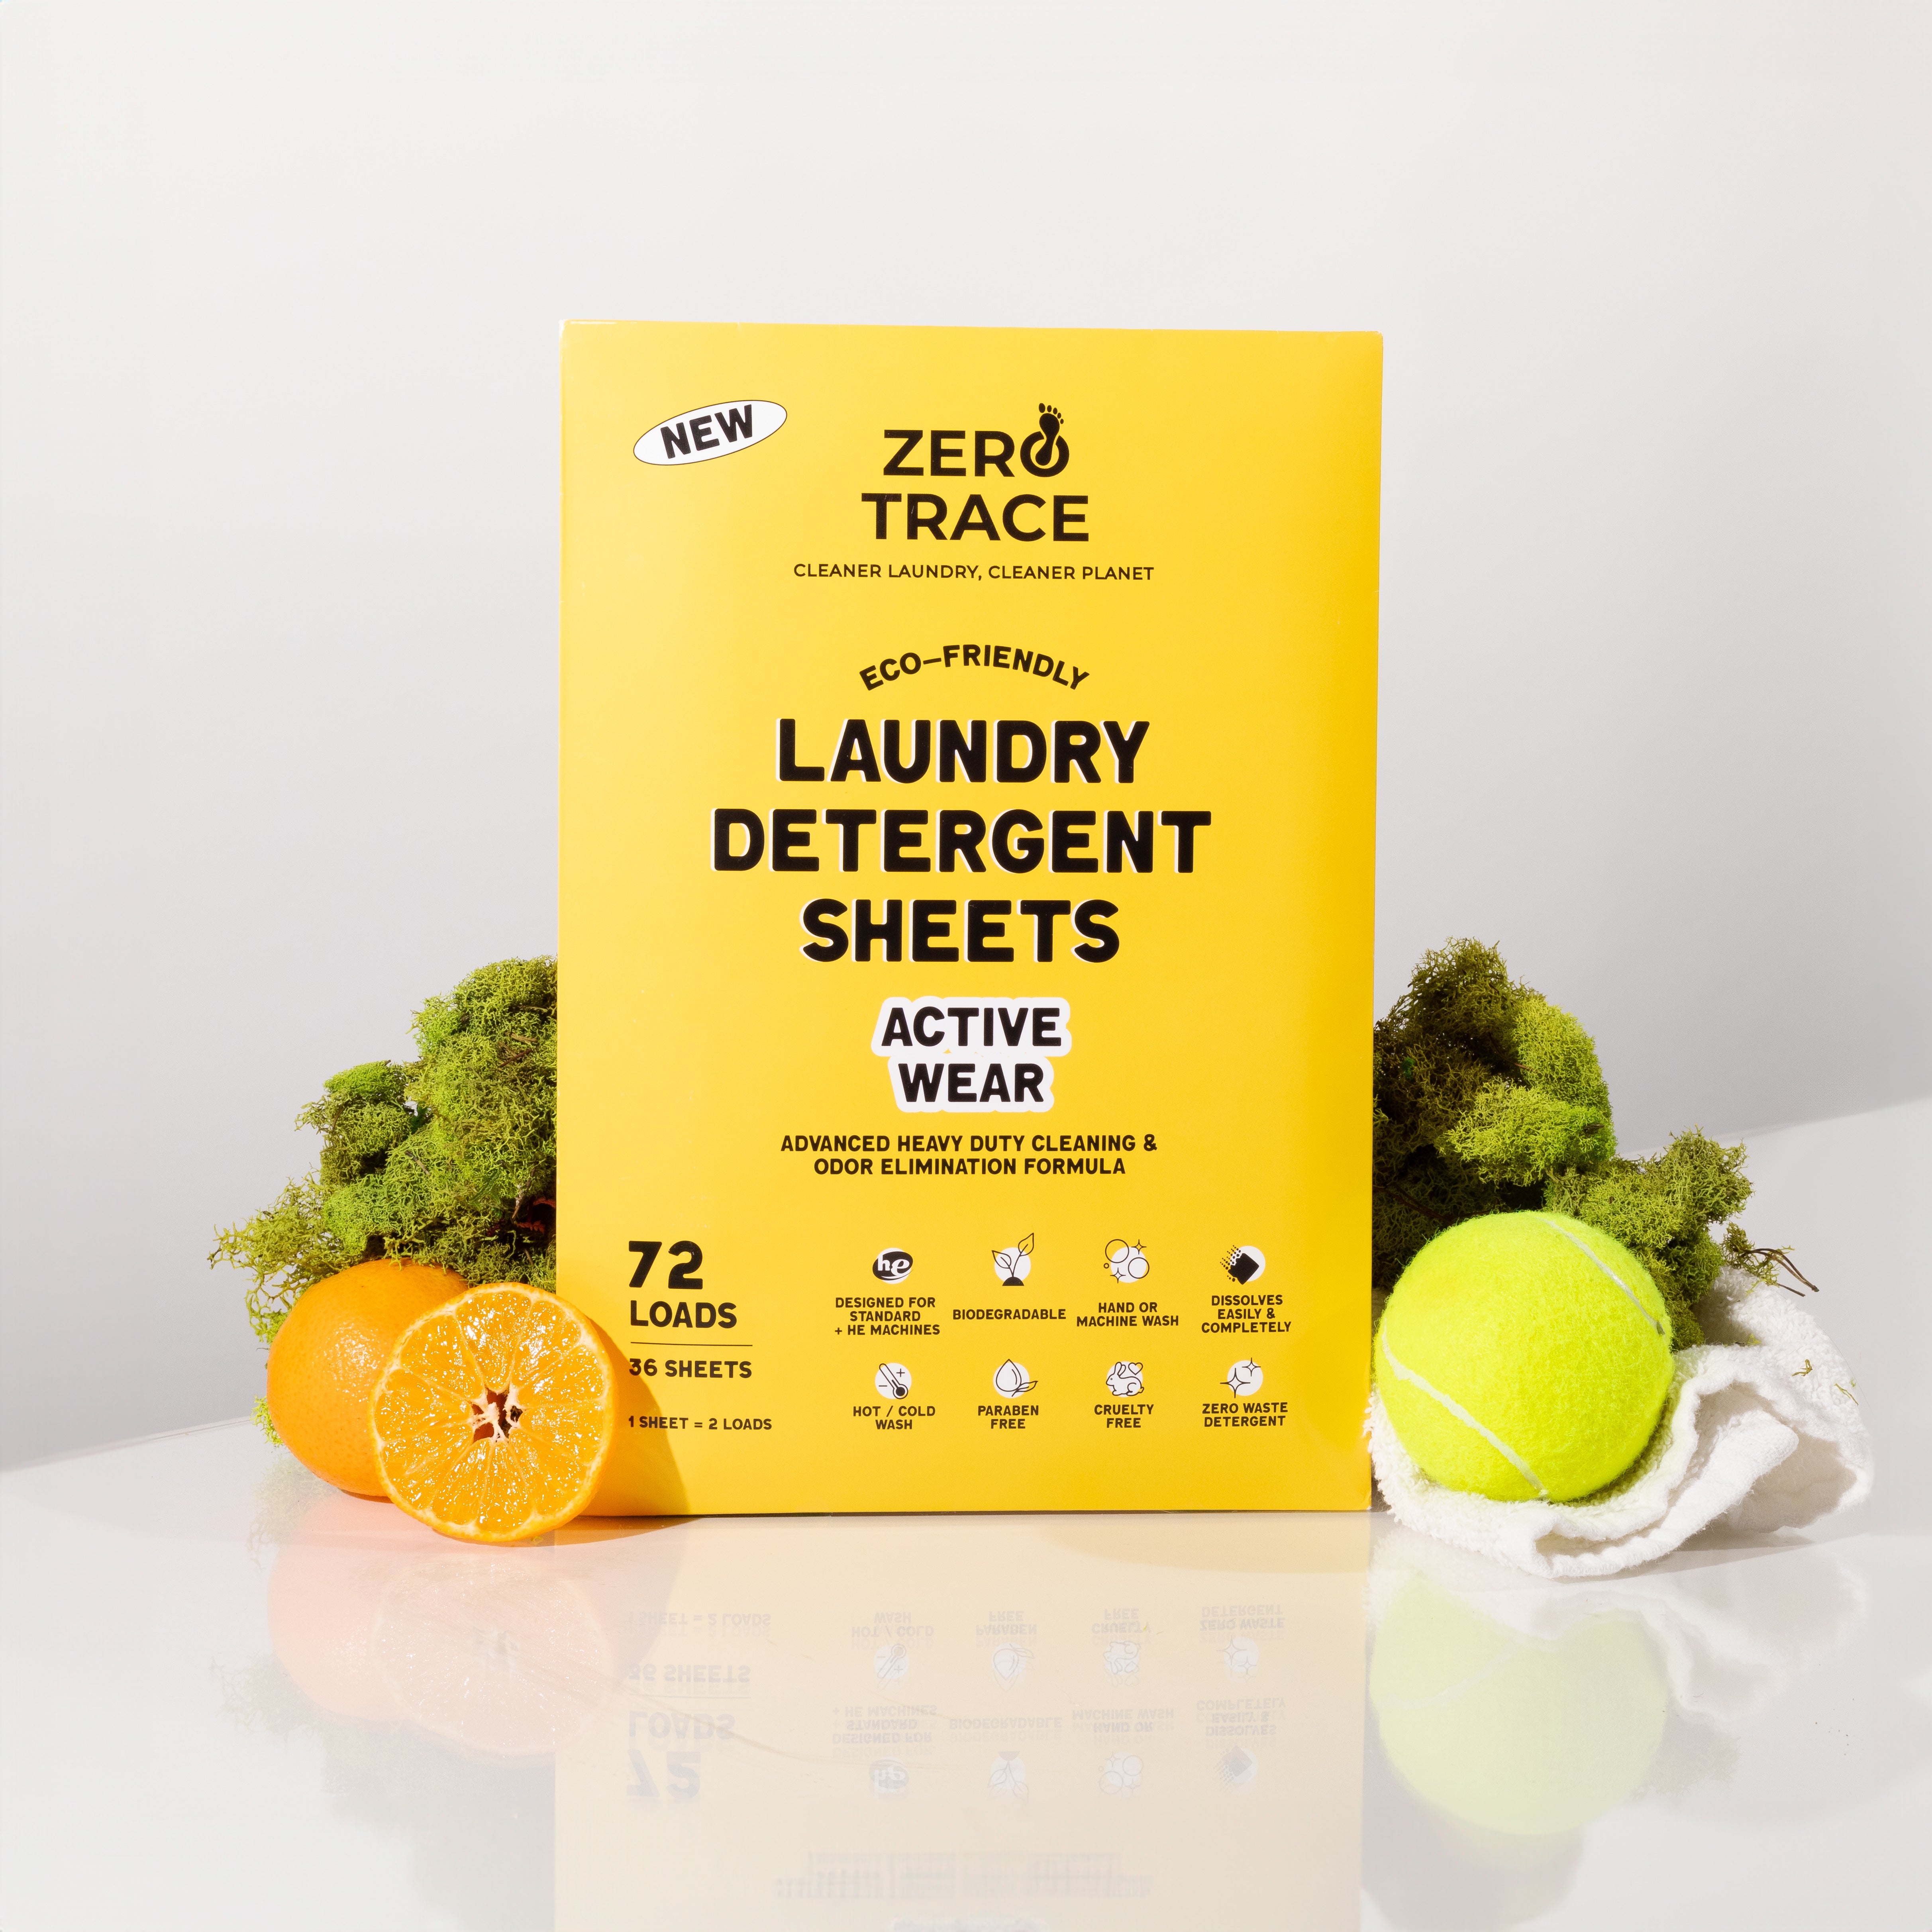 A Zero Trace safe box of Laundry Detergent Sheets placed adjacent to an orange and tennis ball.